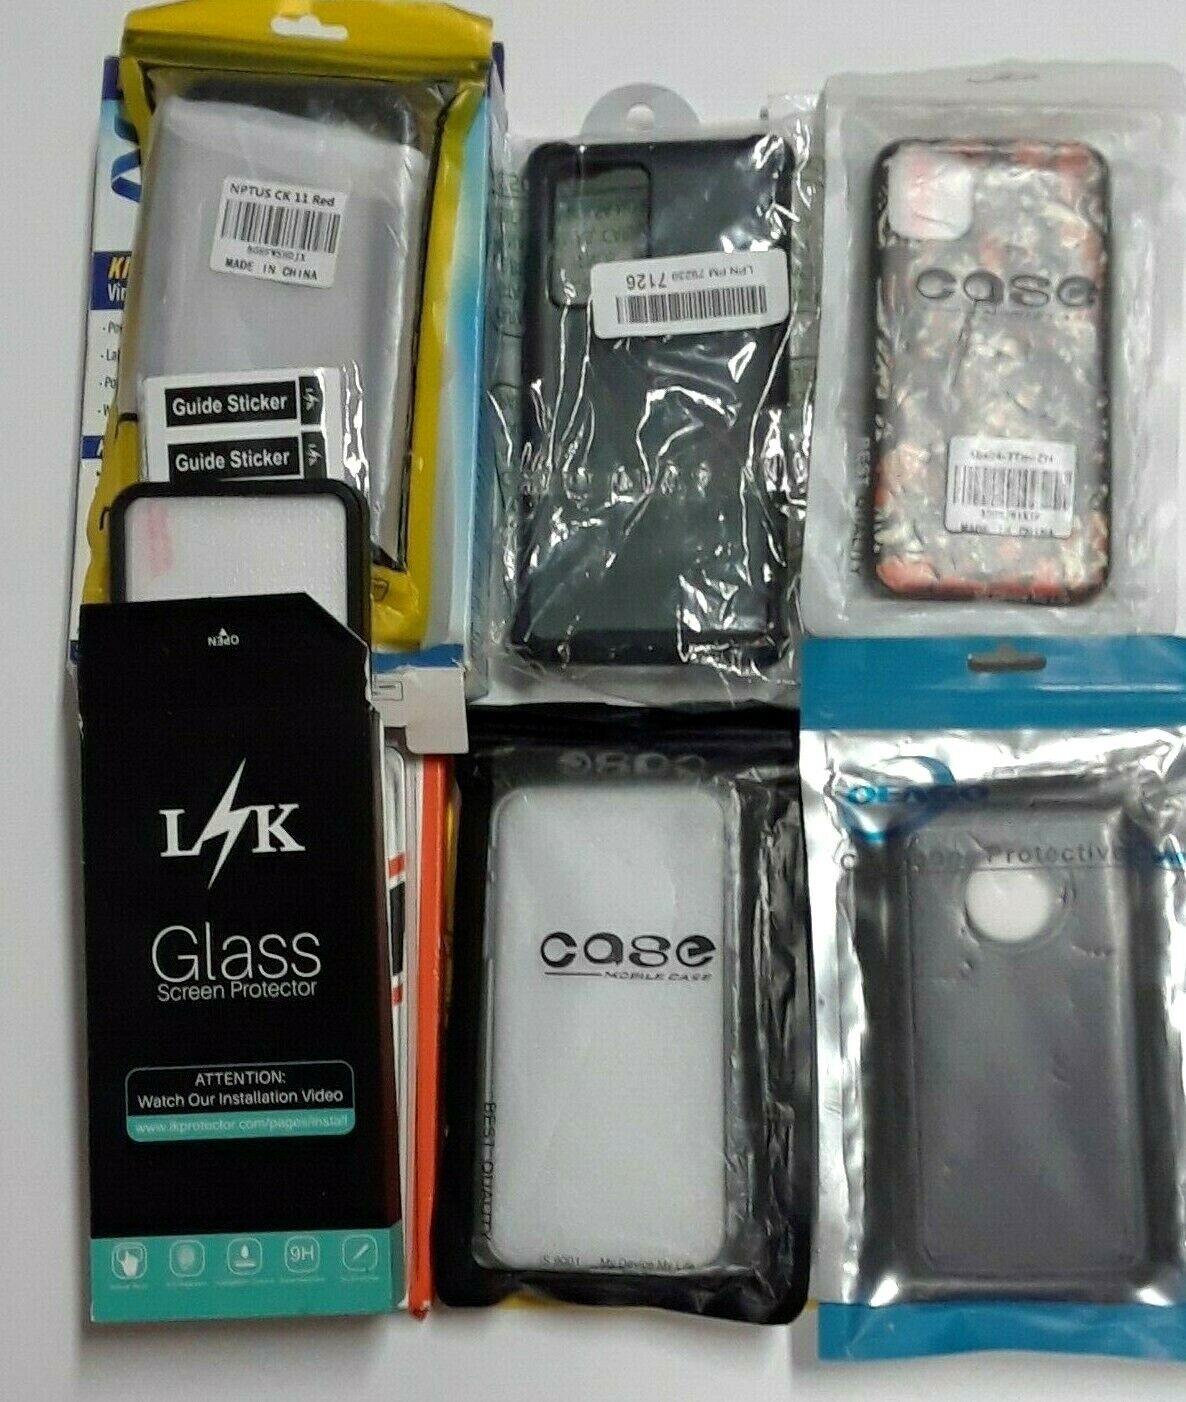 Lot of 18 assorted Cell Phone Cases and some accessories. New. for resale Assorted does not apply - фотография #3